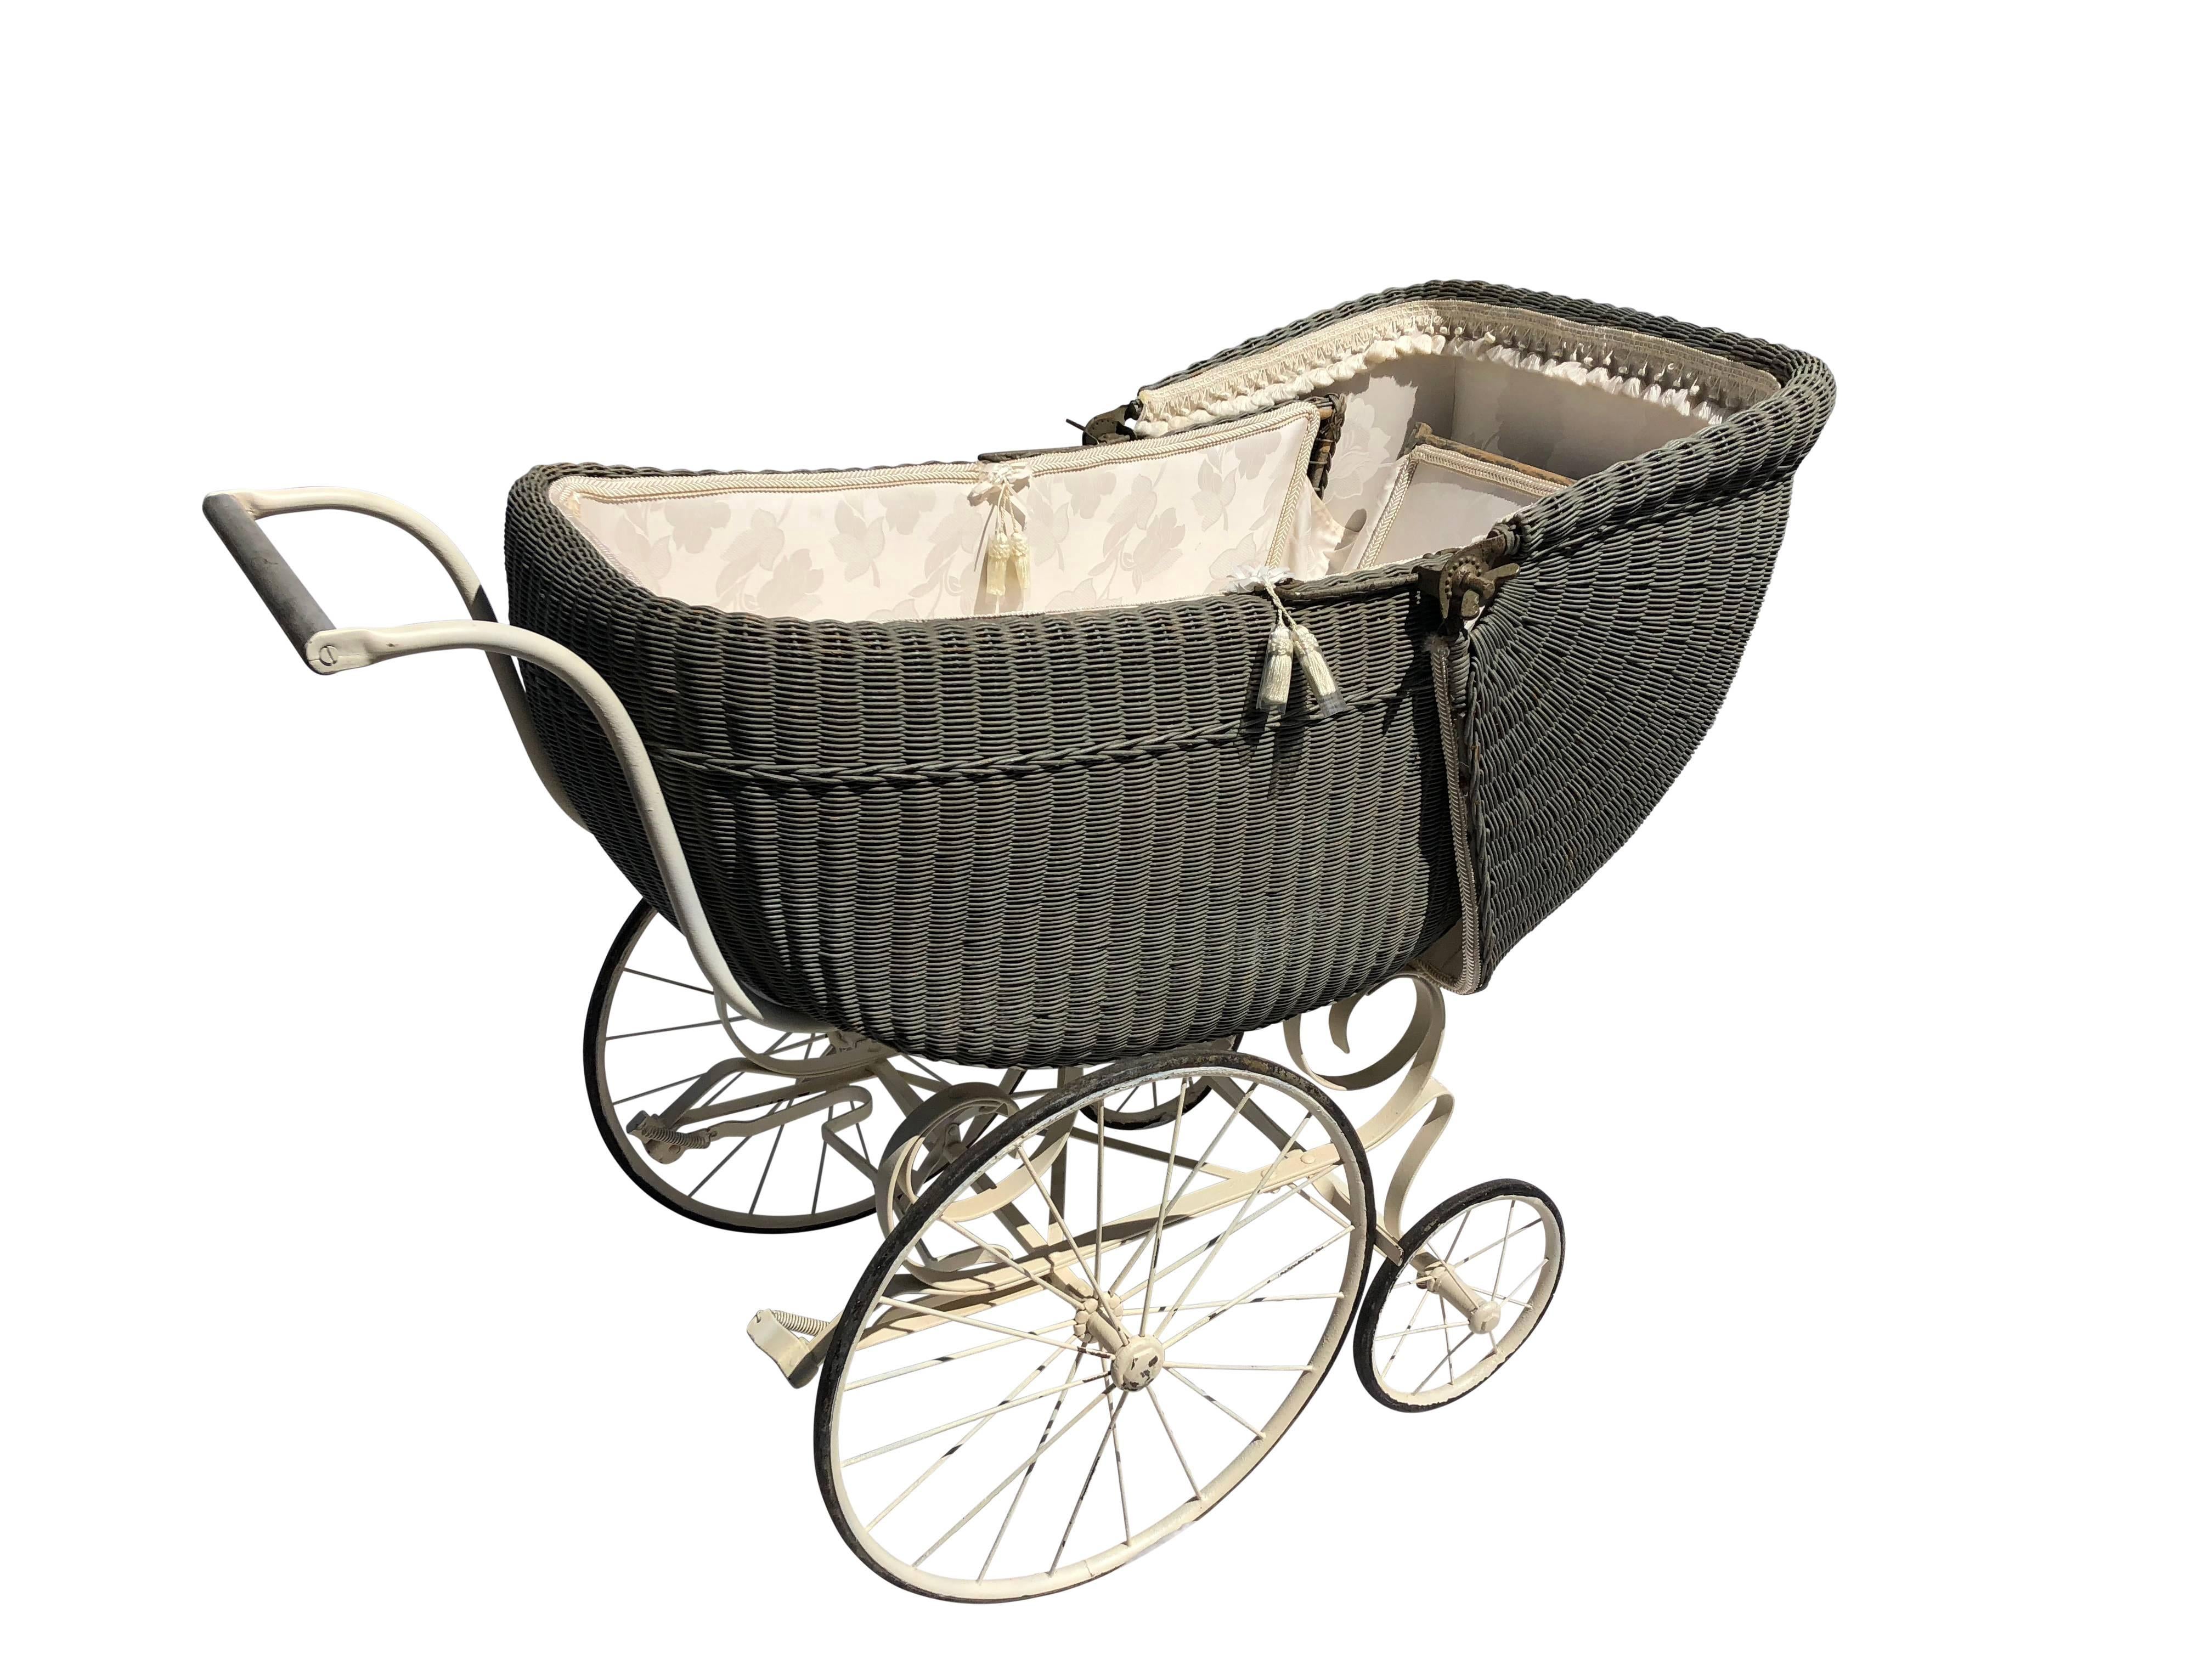 This is an amazing ready to use antique wicker baby carriage in its original color with spring suspension and it's original wheels. The inside top area folds down flat for when the baby is sleeping and can be easily adjusted for a more reclined